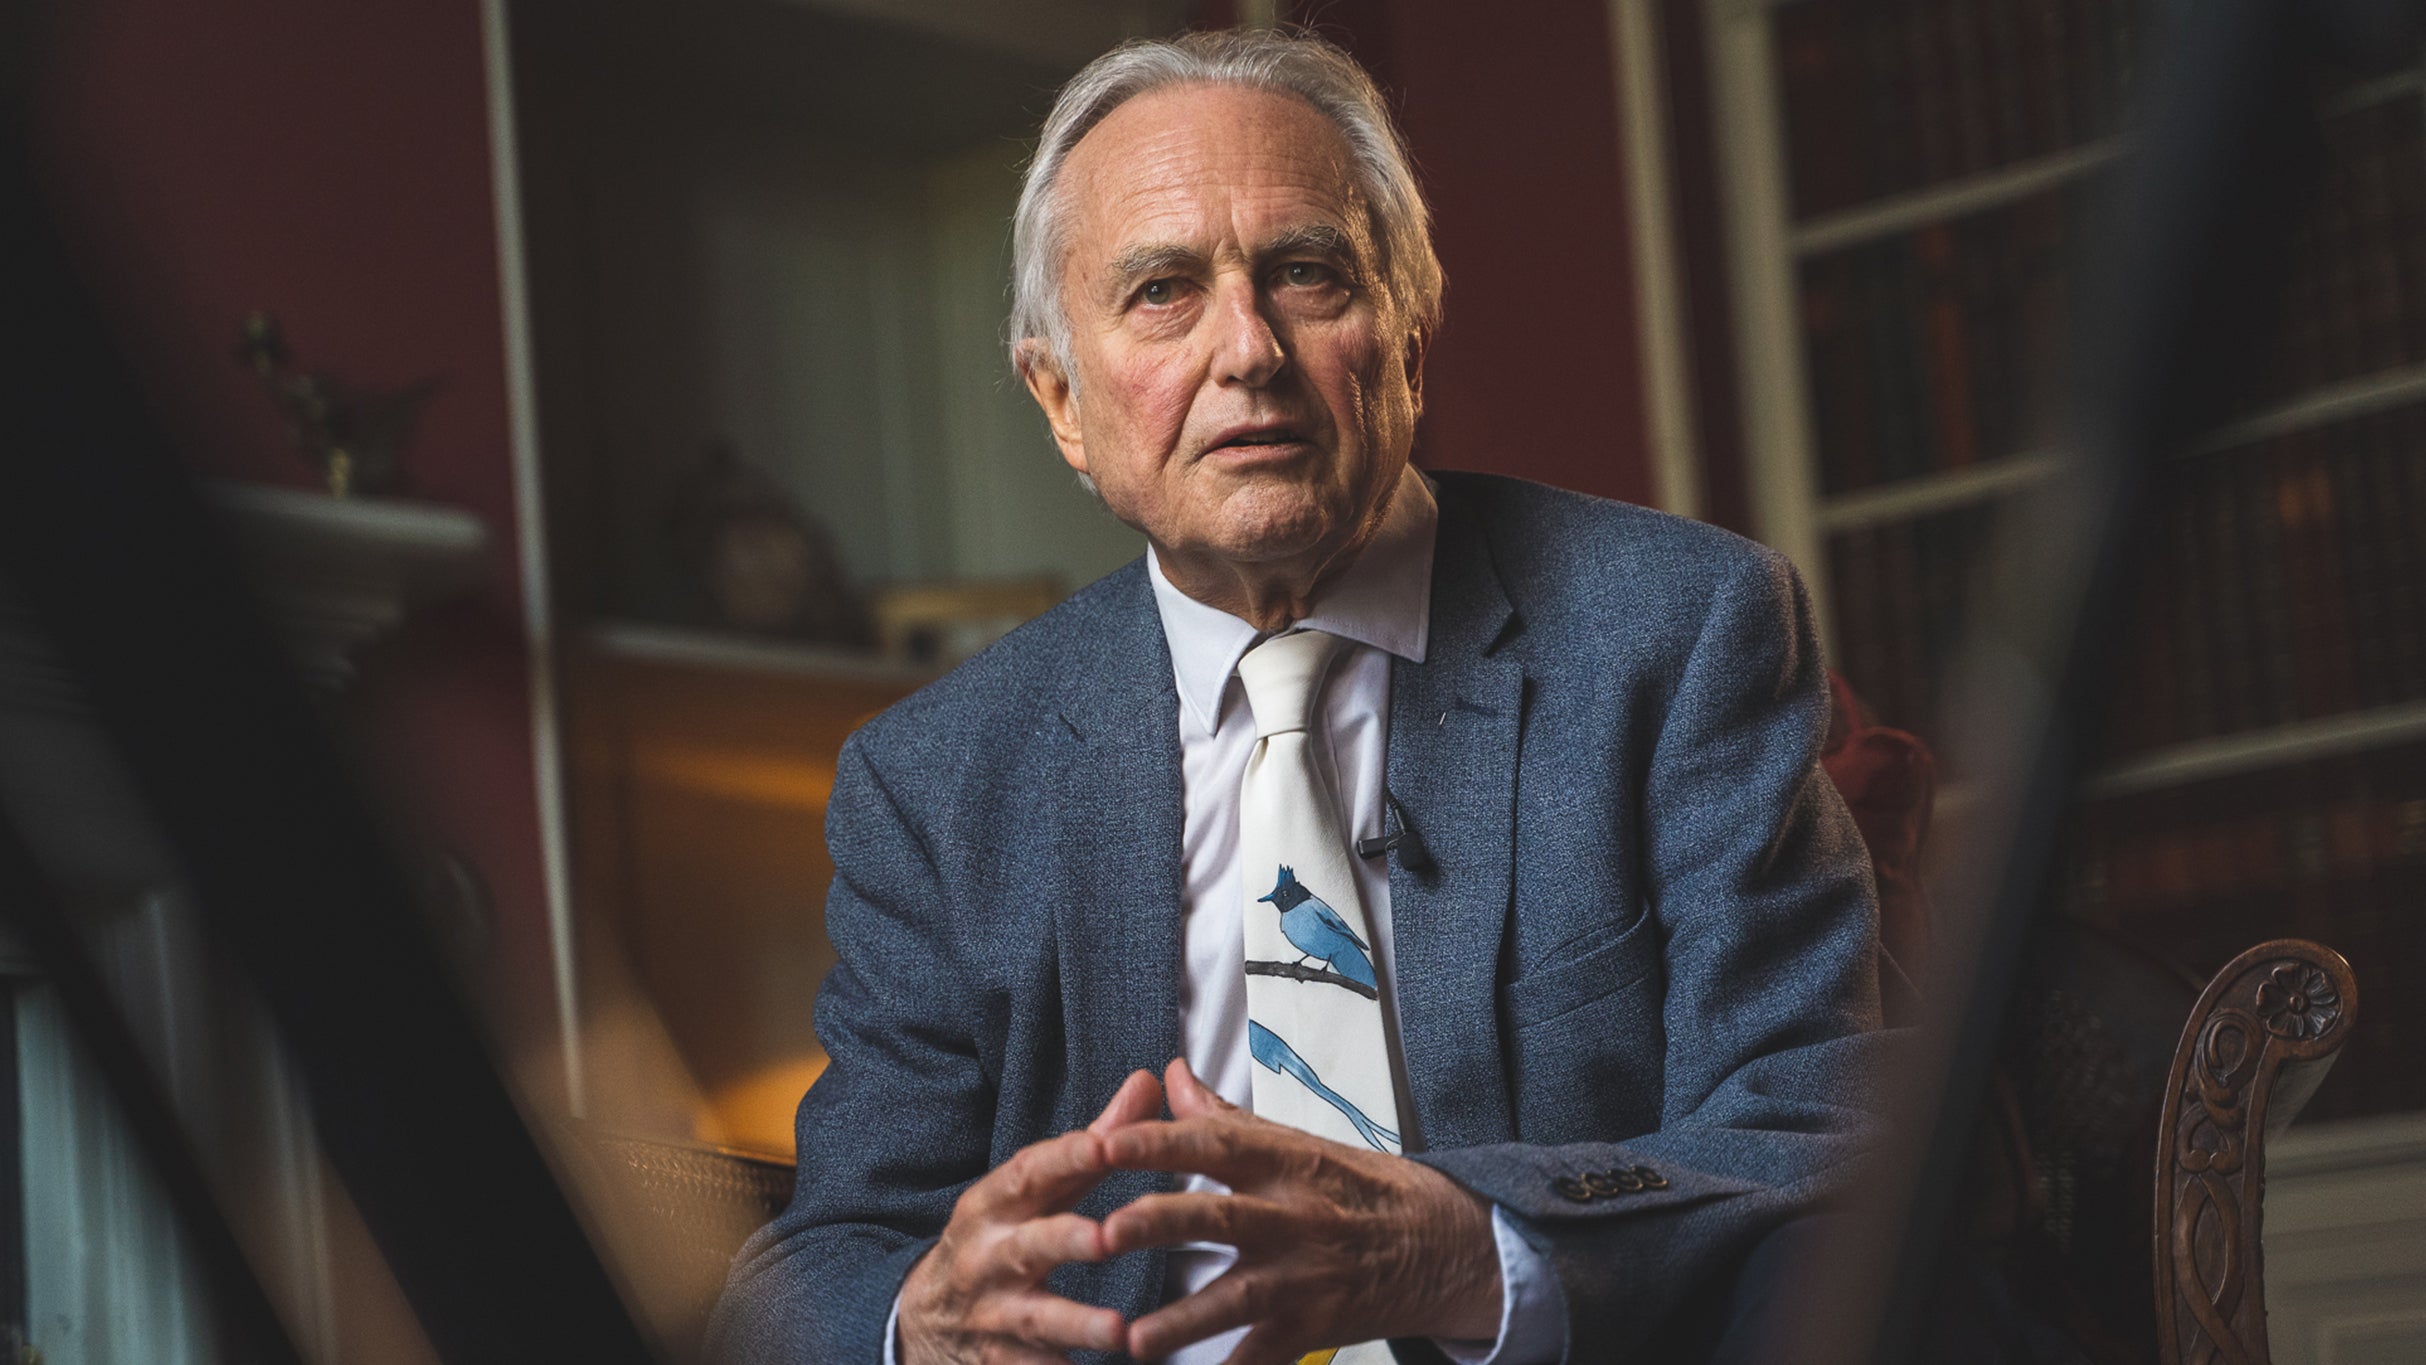 An Evening with Richard Dawkins and Friends  presale password for early tickets in Medford